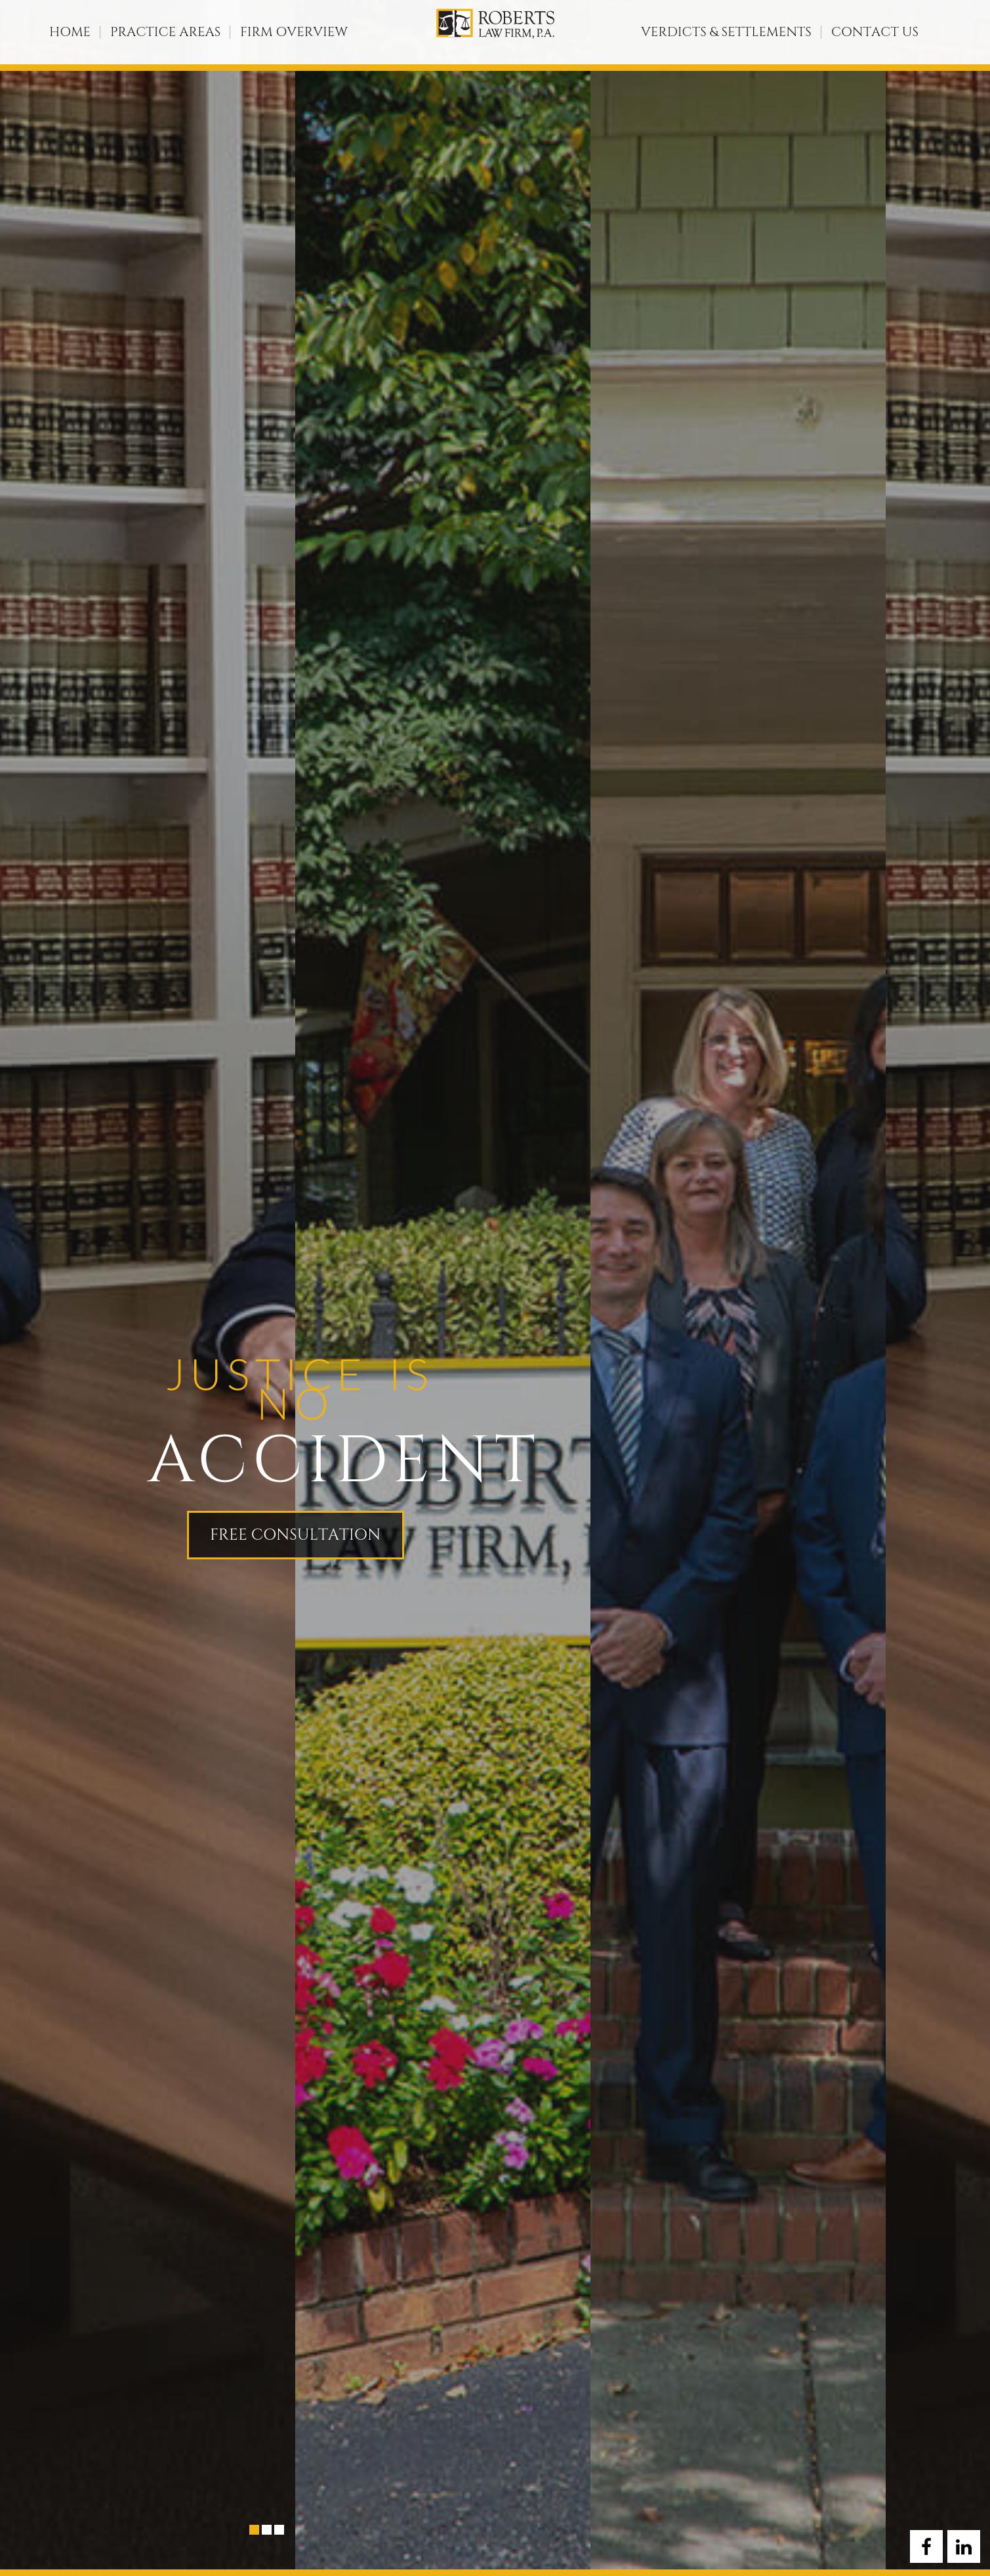 The Roberts Law Firm, P.A. - Gastonia NC Lawyers